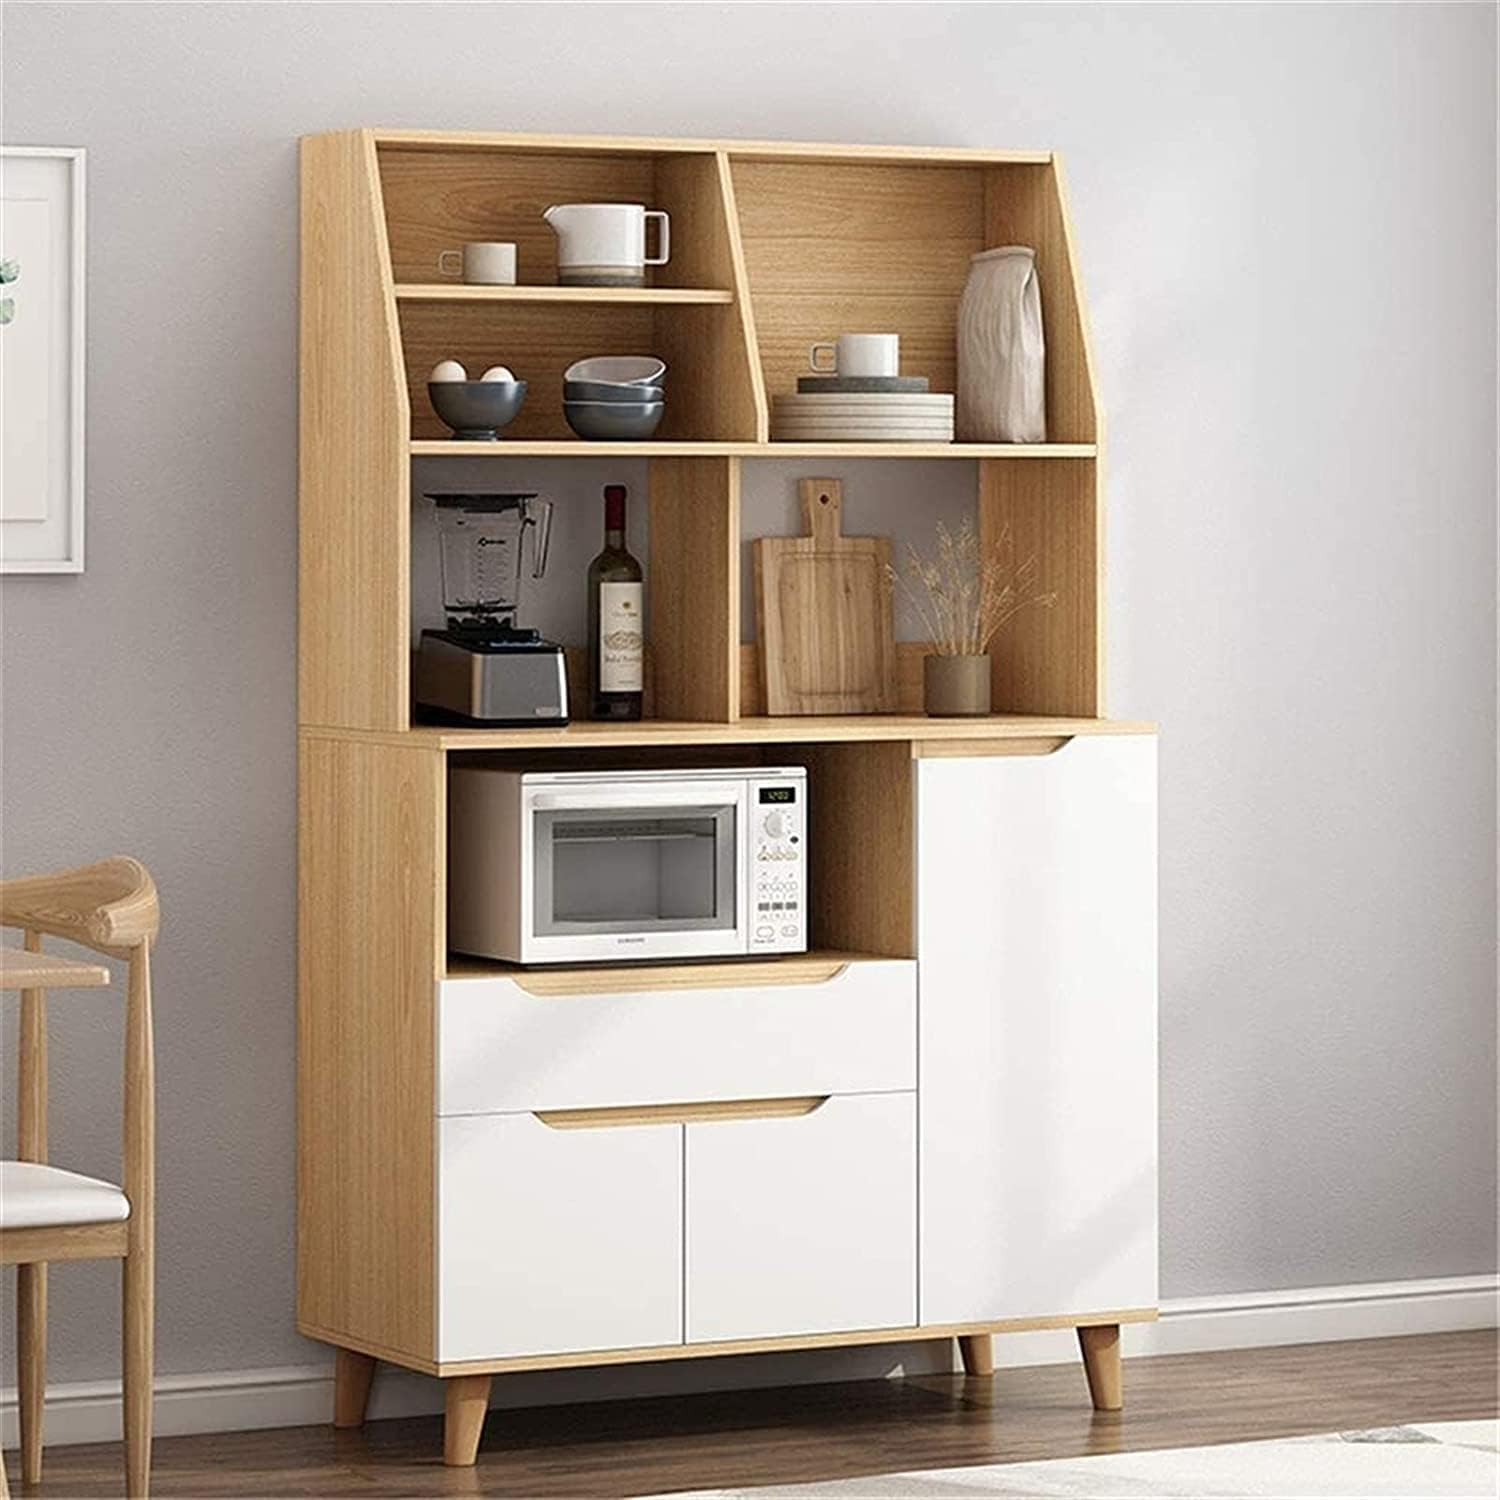 Where To Buy Cabinet